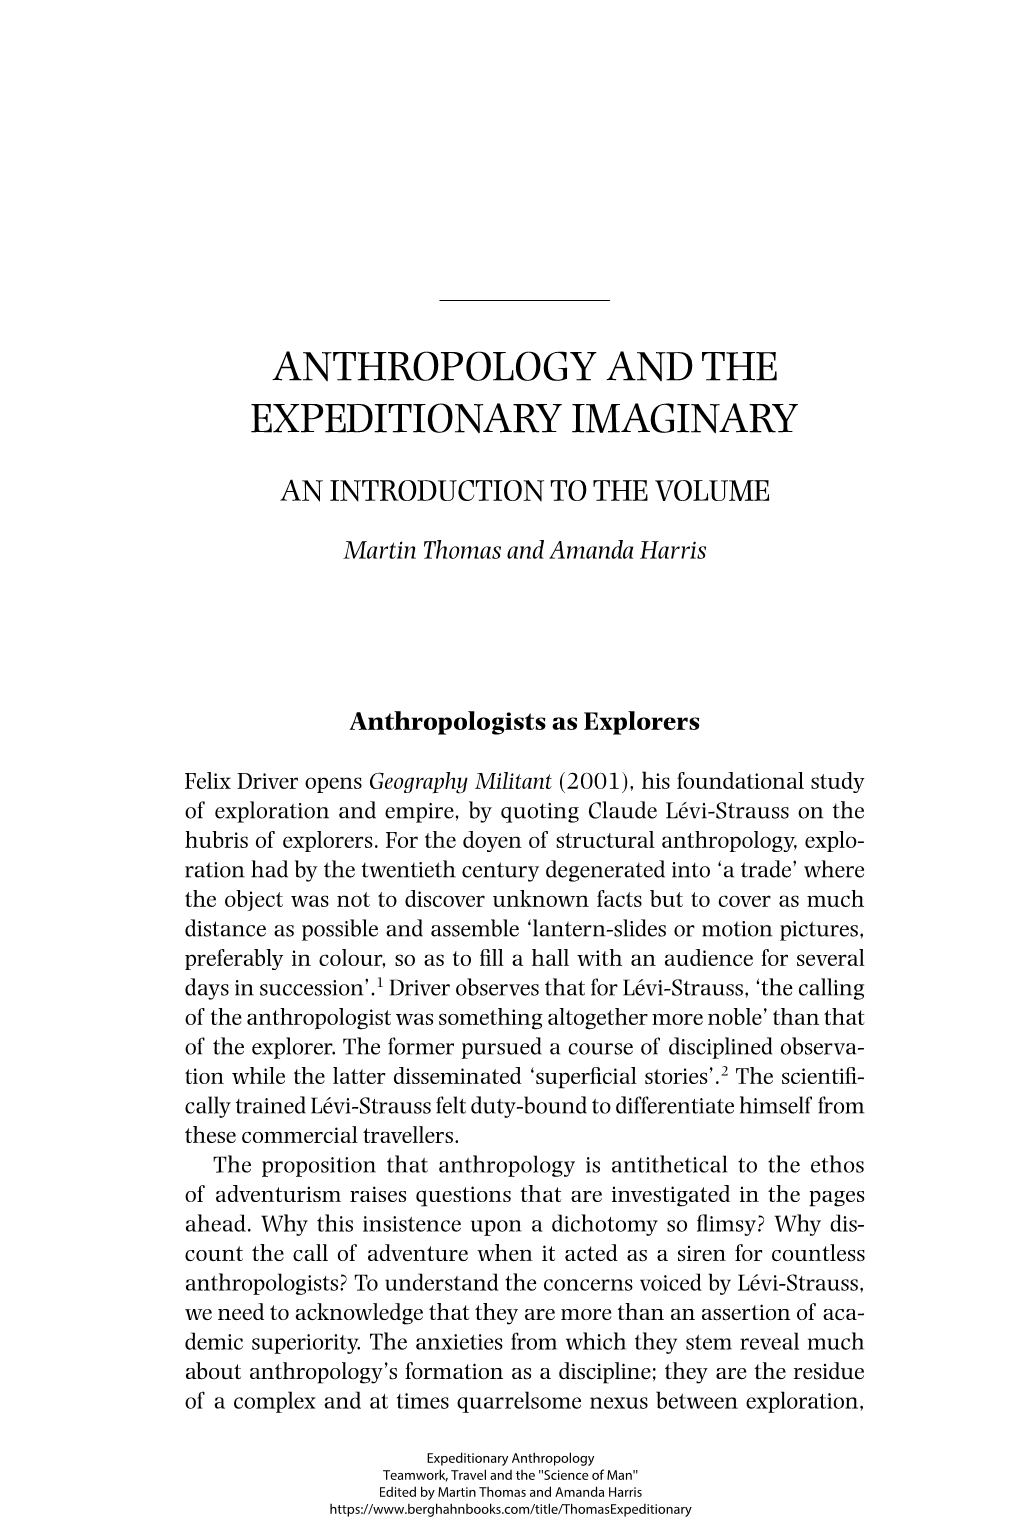 Anthropology and the Expeditionary Imaginary: an Introduction to the Volume